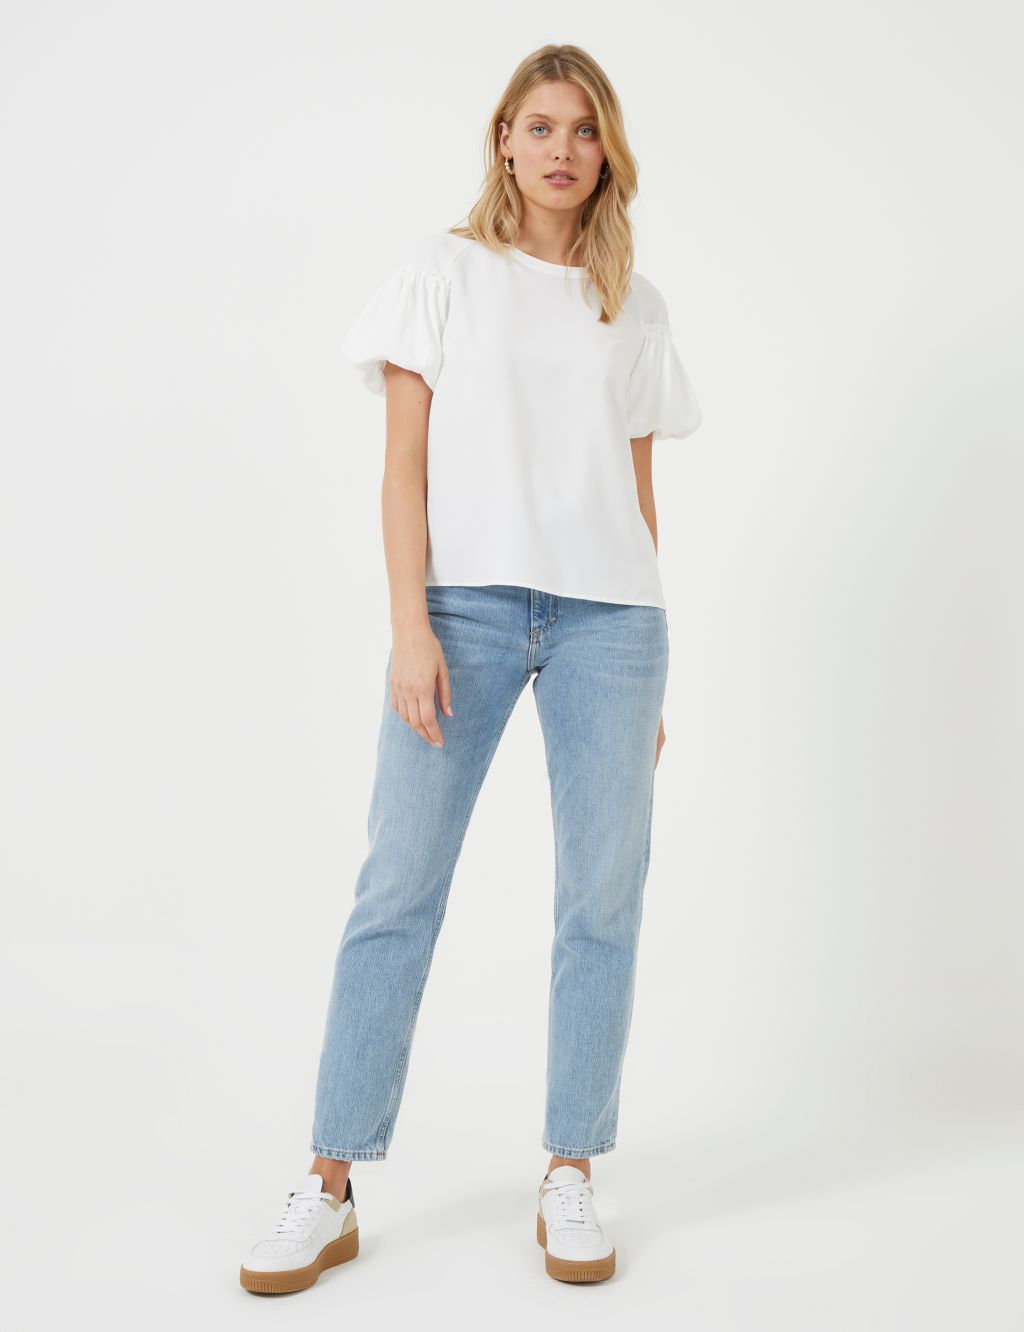 Page 3 - Women's White Tops | M&S